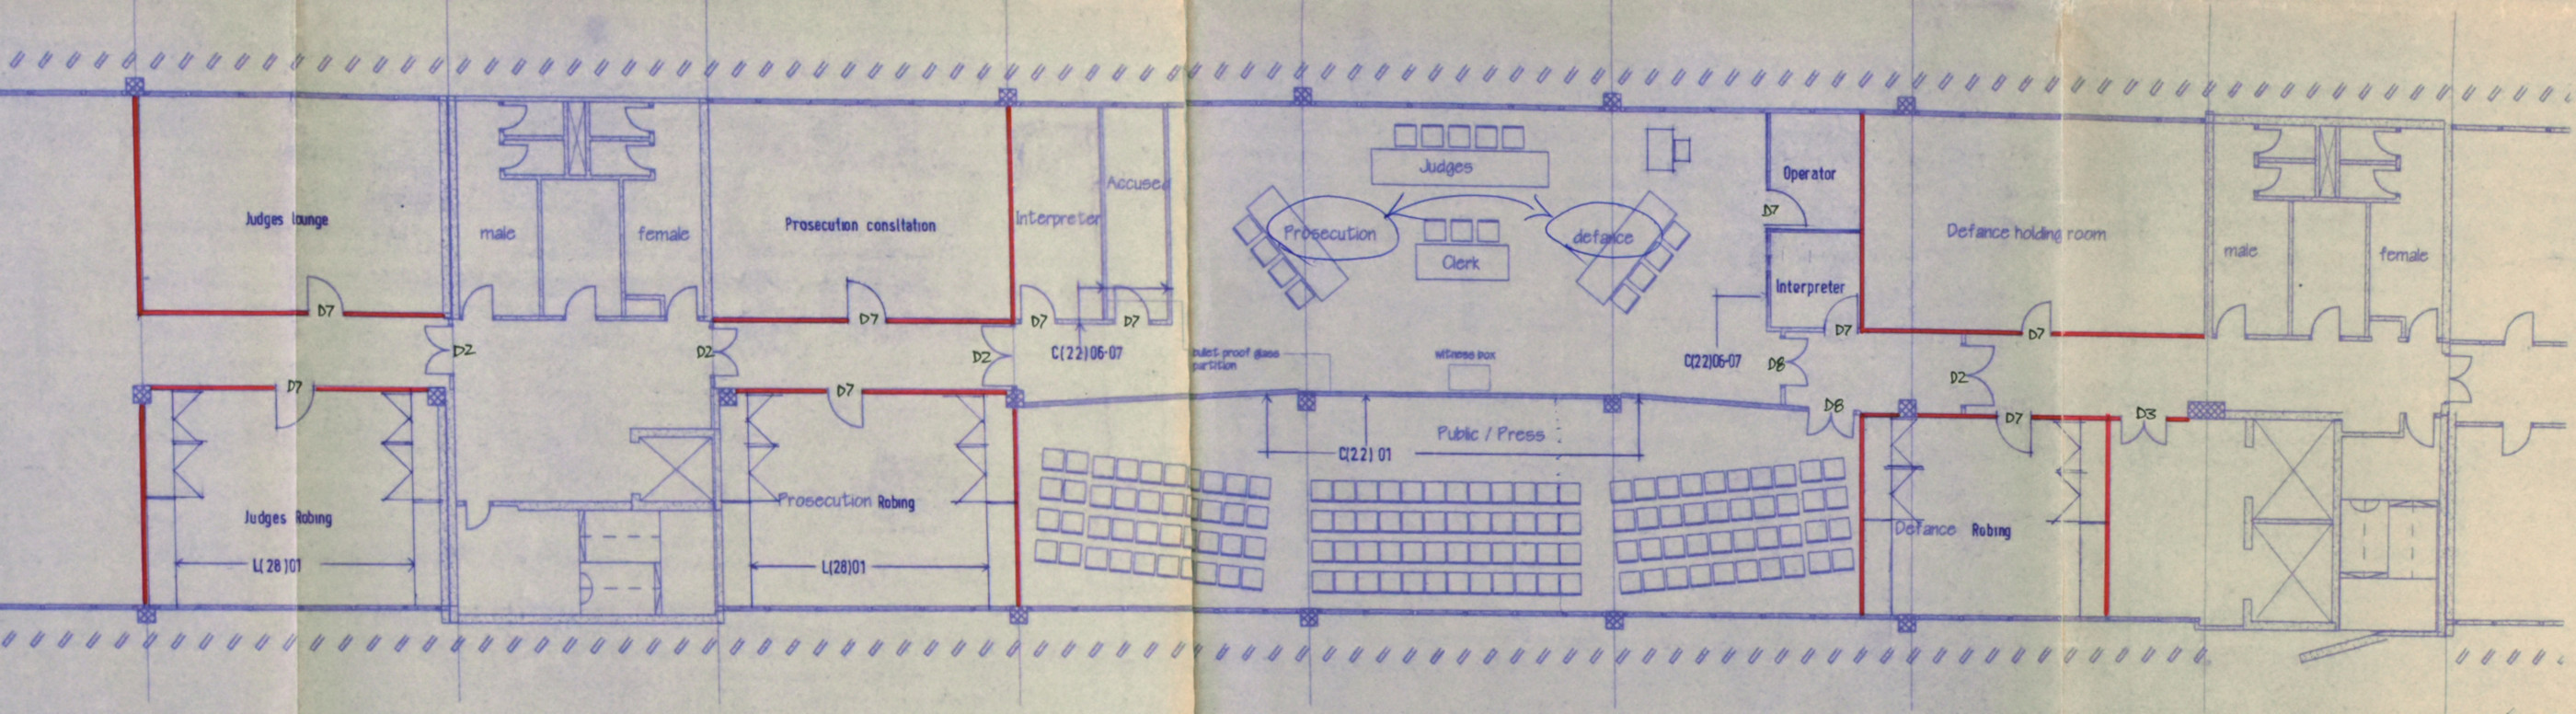 Blueprint of two of the ICTR's courtrooms.